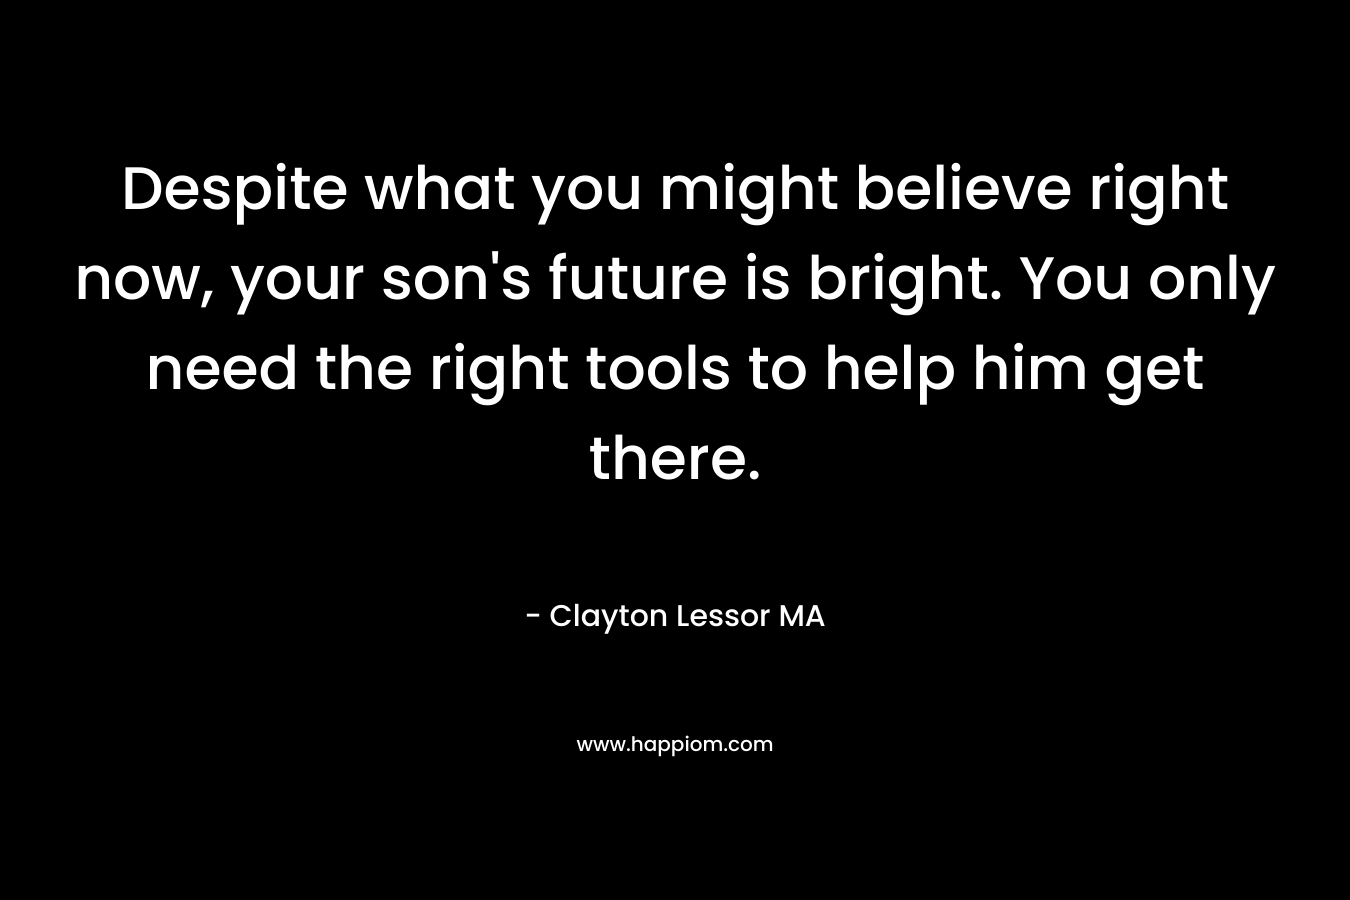 Despite what you might believe right now, your son’s future is bright. You only need the right tools to help him get there. – Clayton Lessor MA